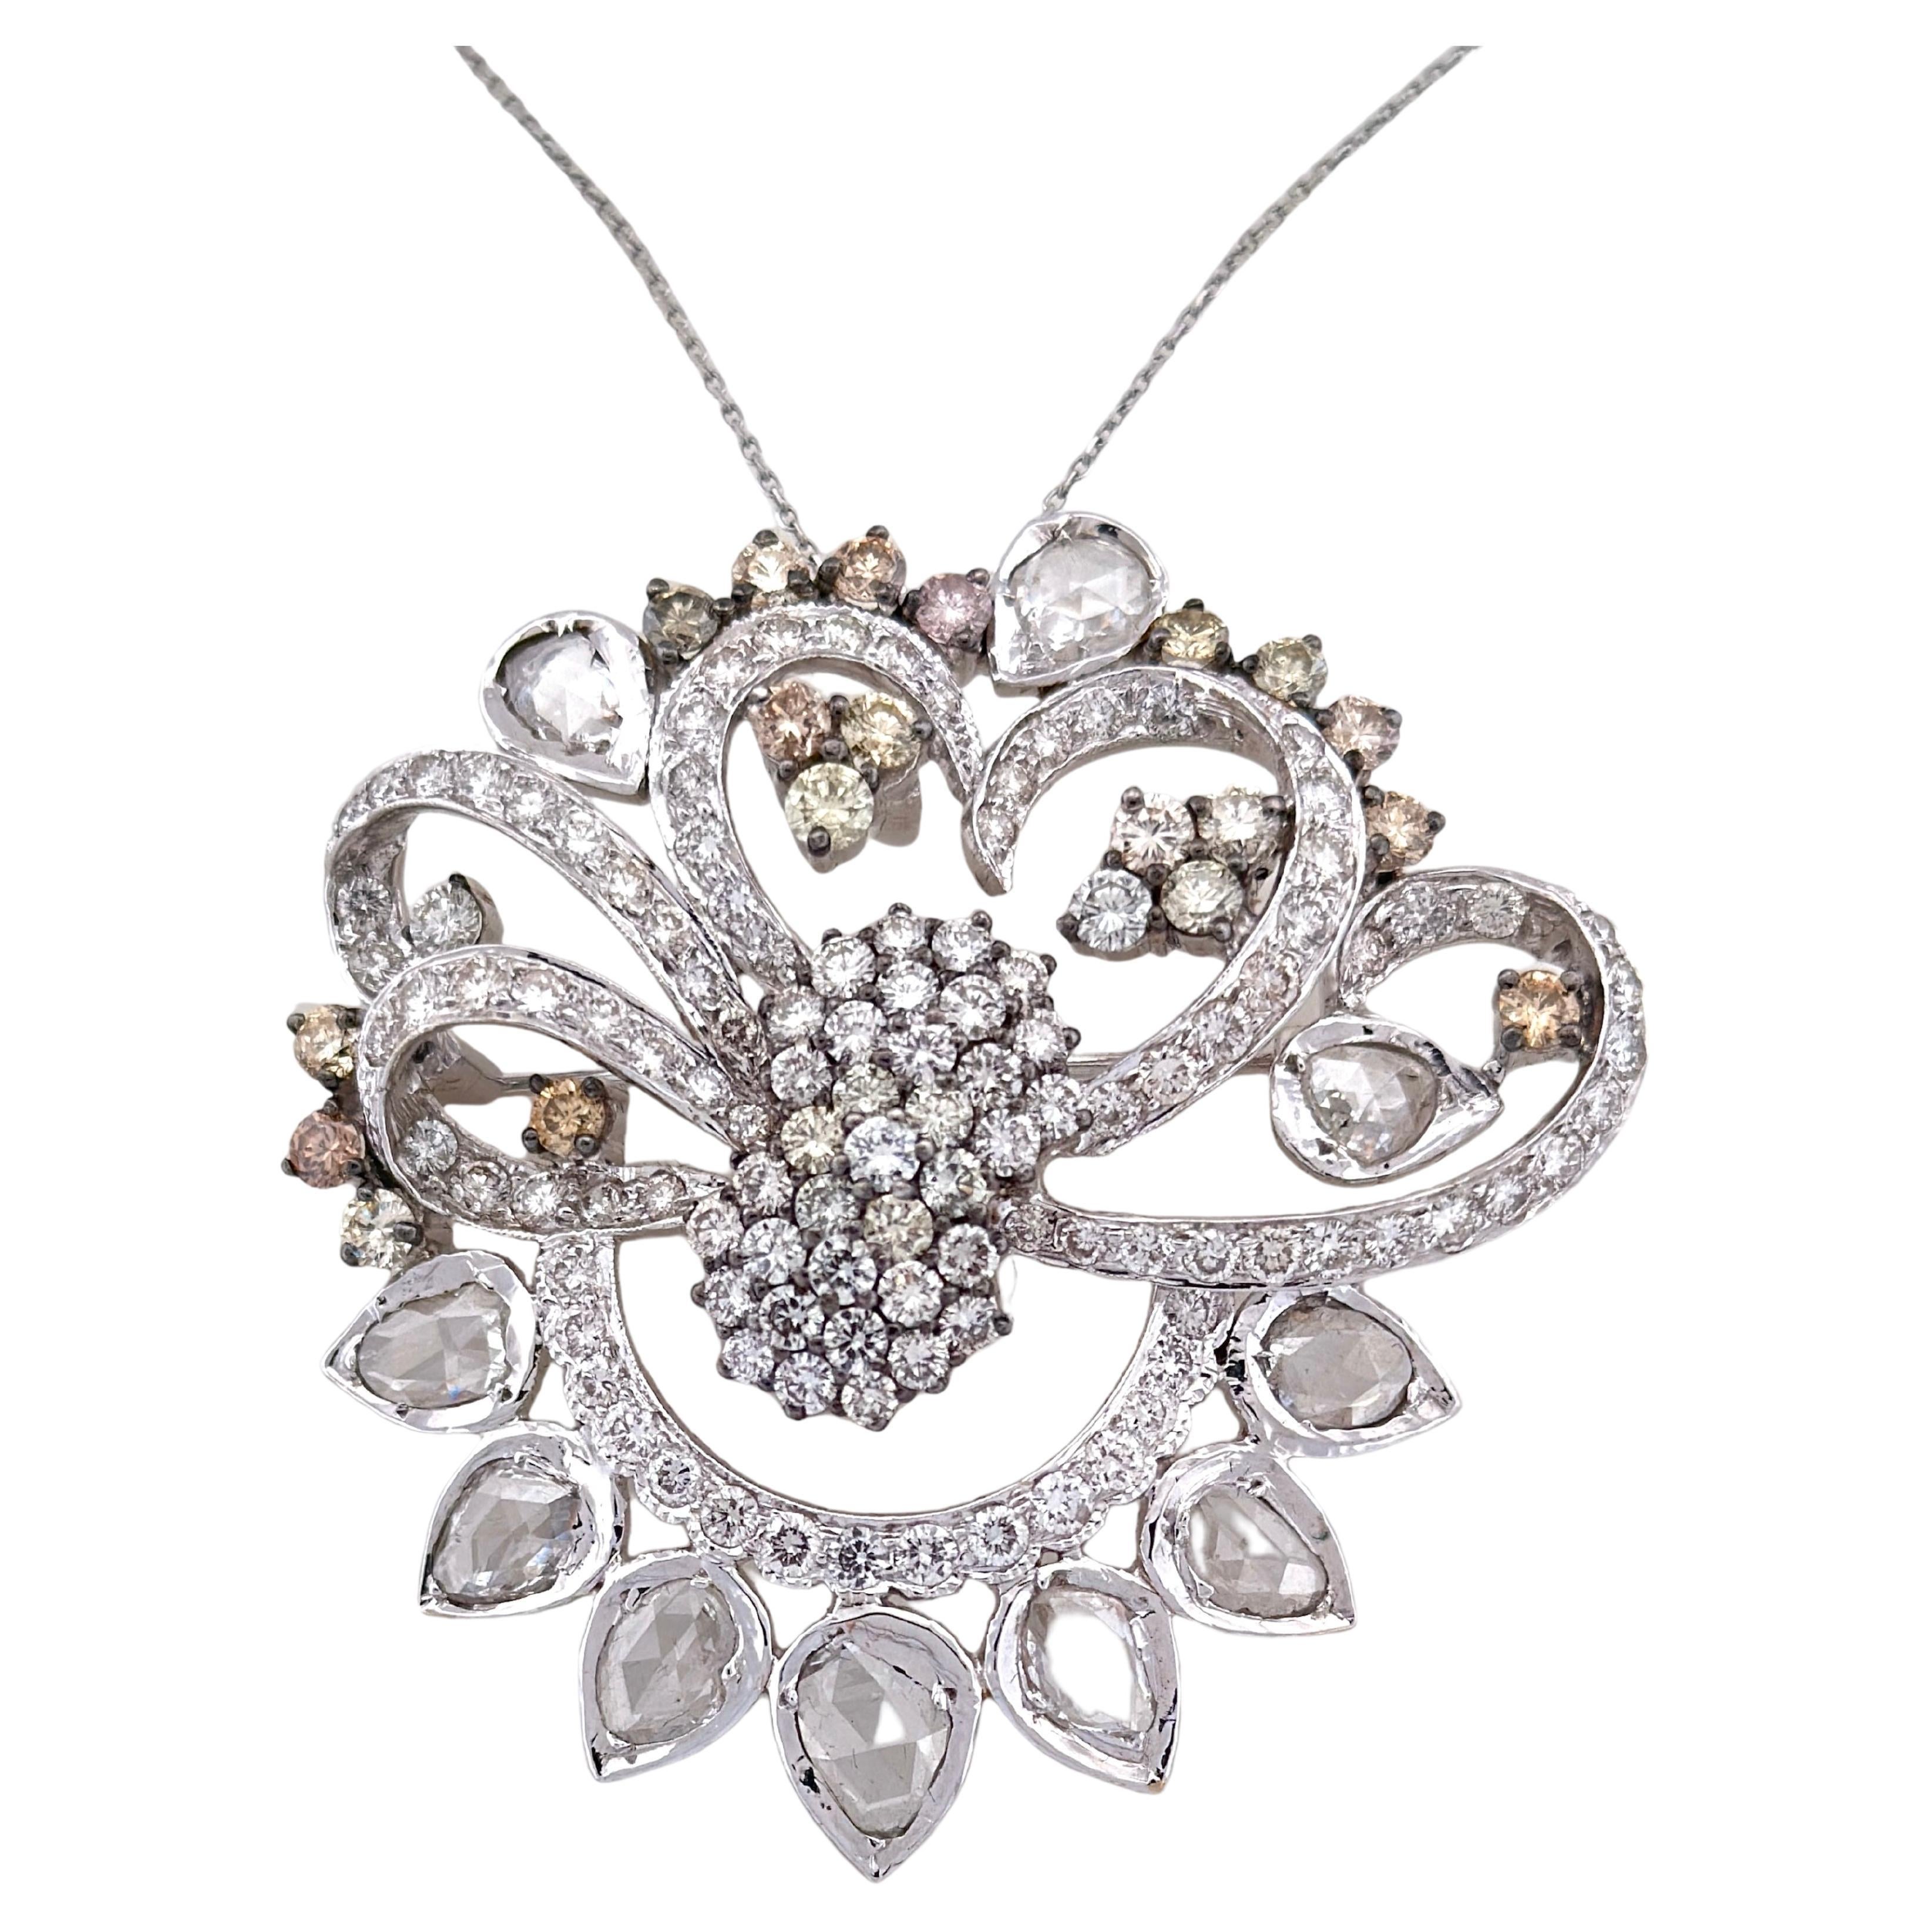 Unique Whited Diamond Pendant And Brooch For Sale